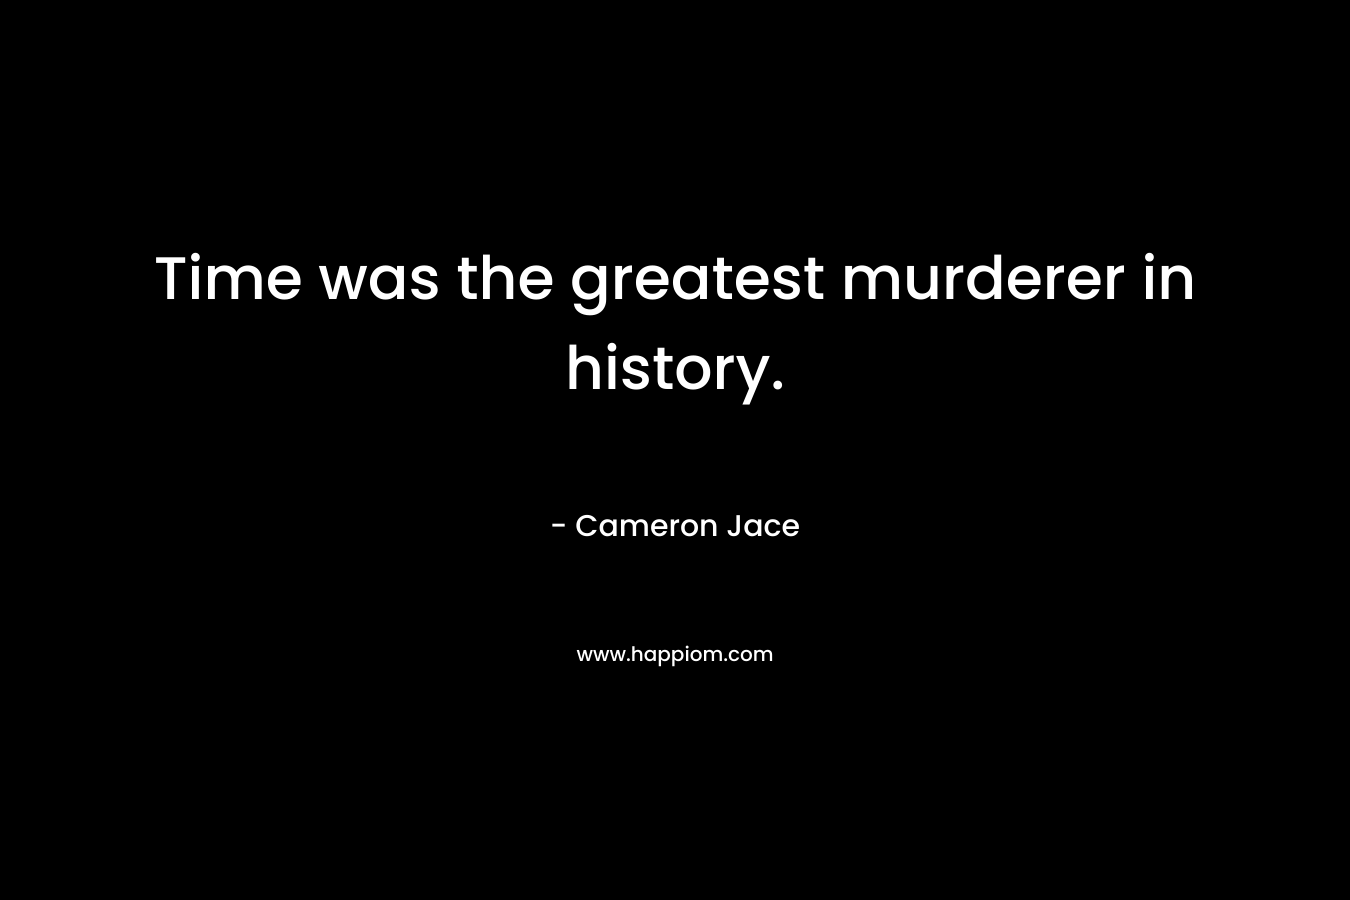 Time was the greatest murderer in history.